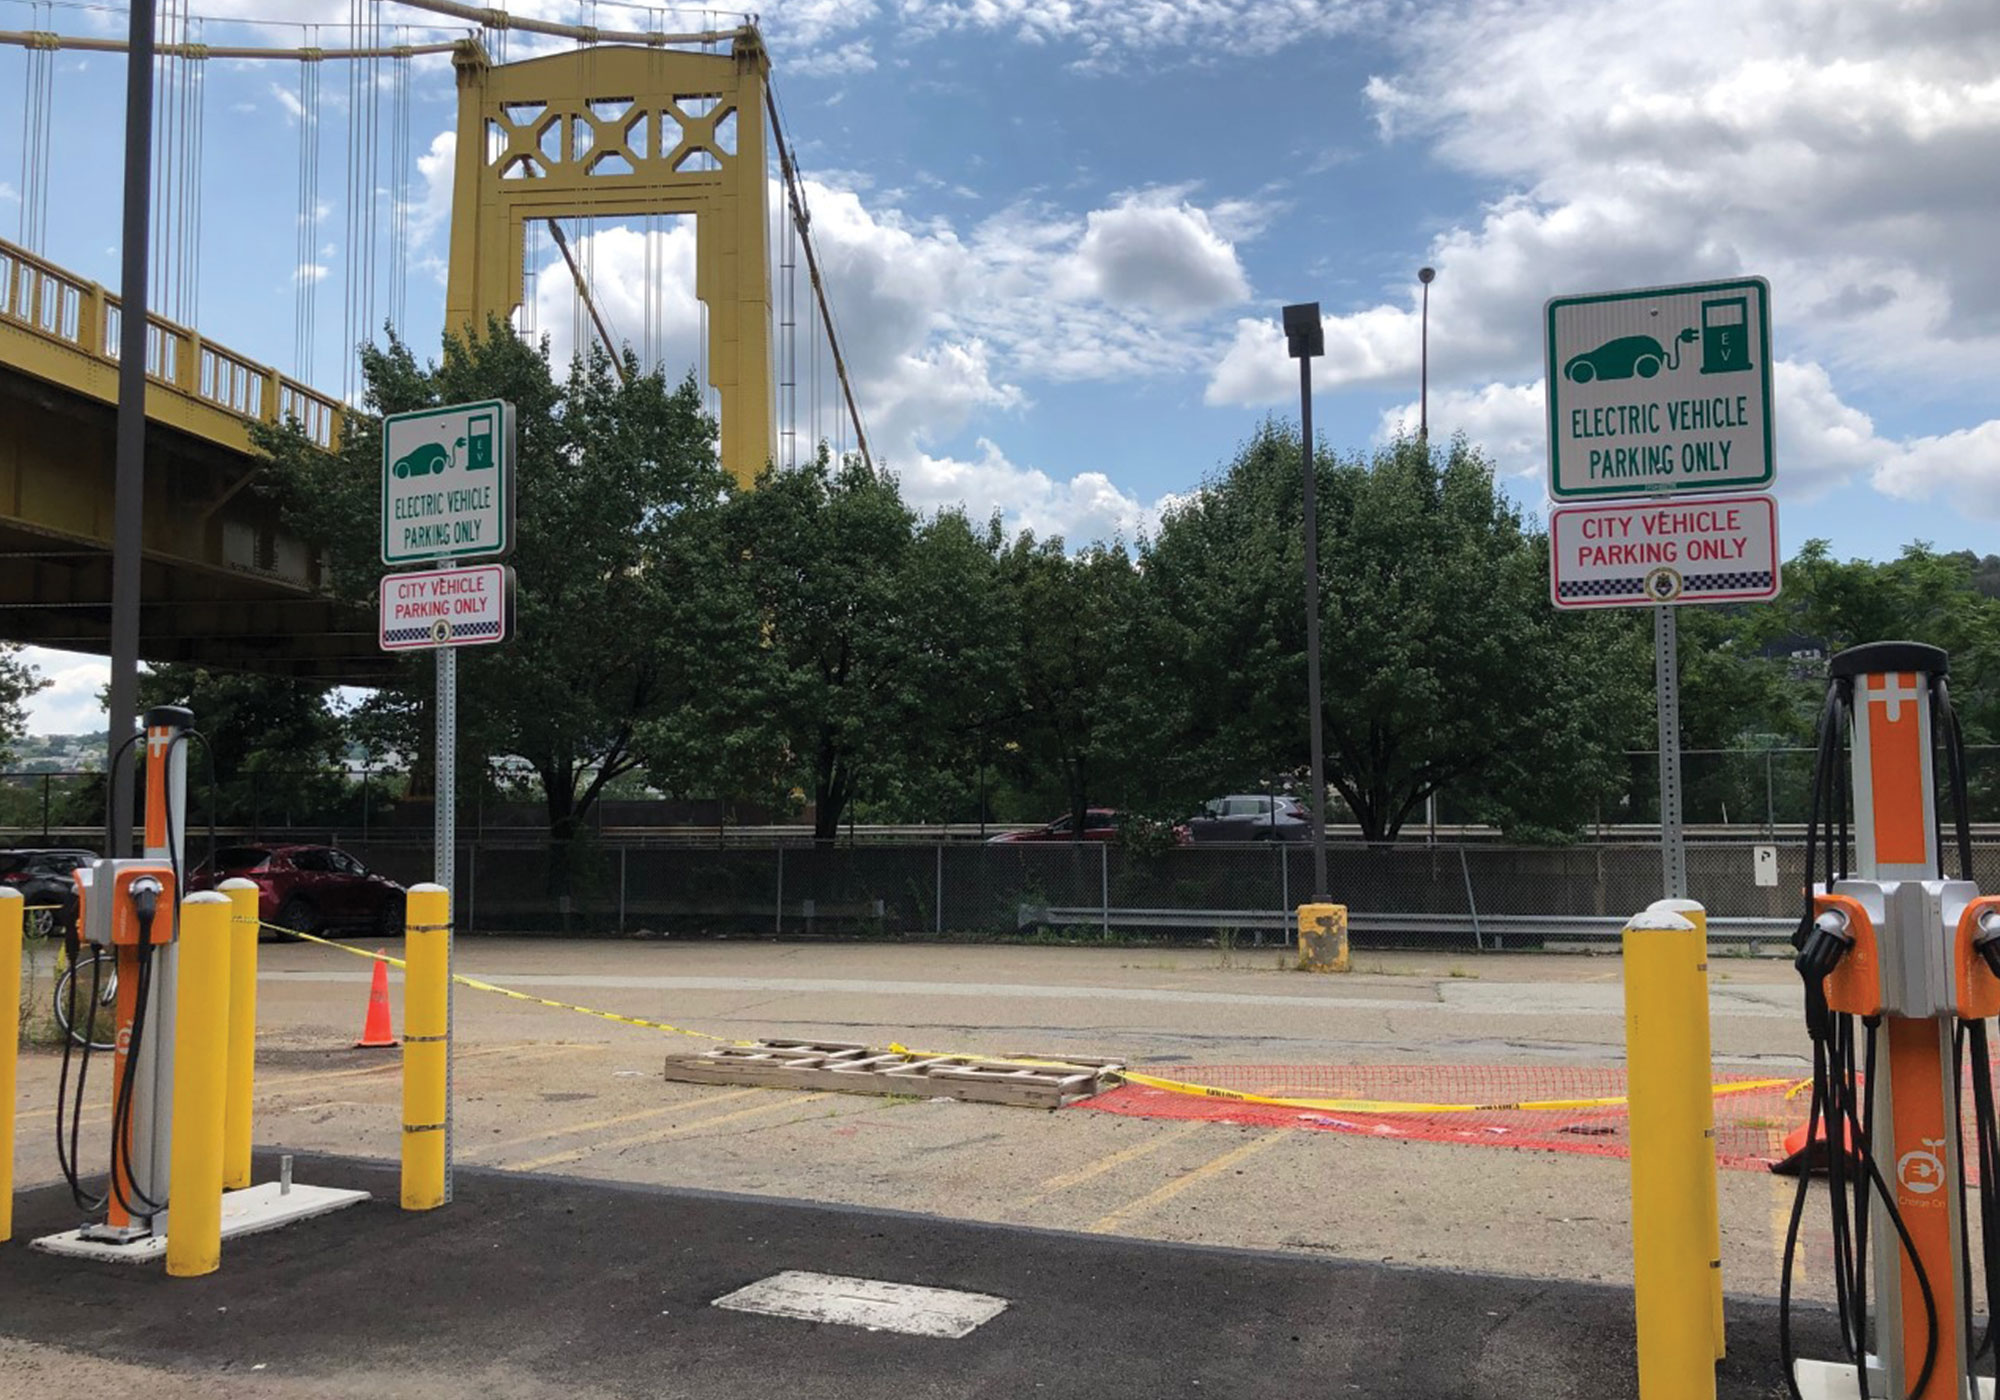 Parking spaces for electric vehicles with bridge in background